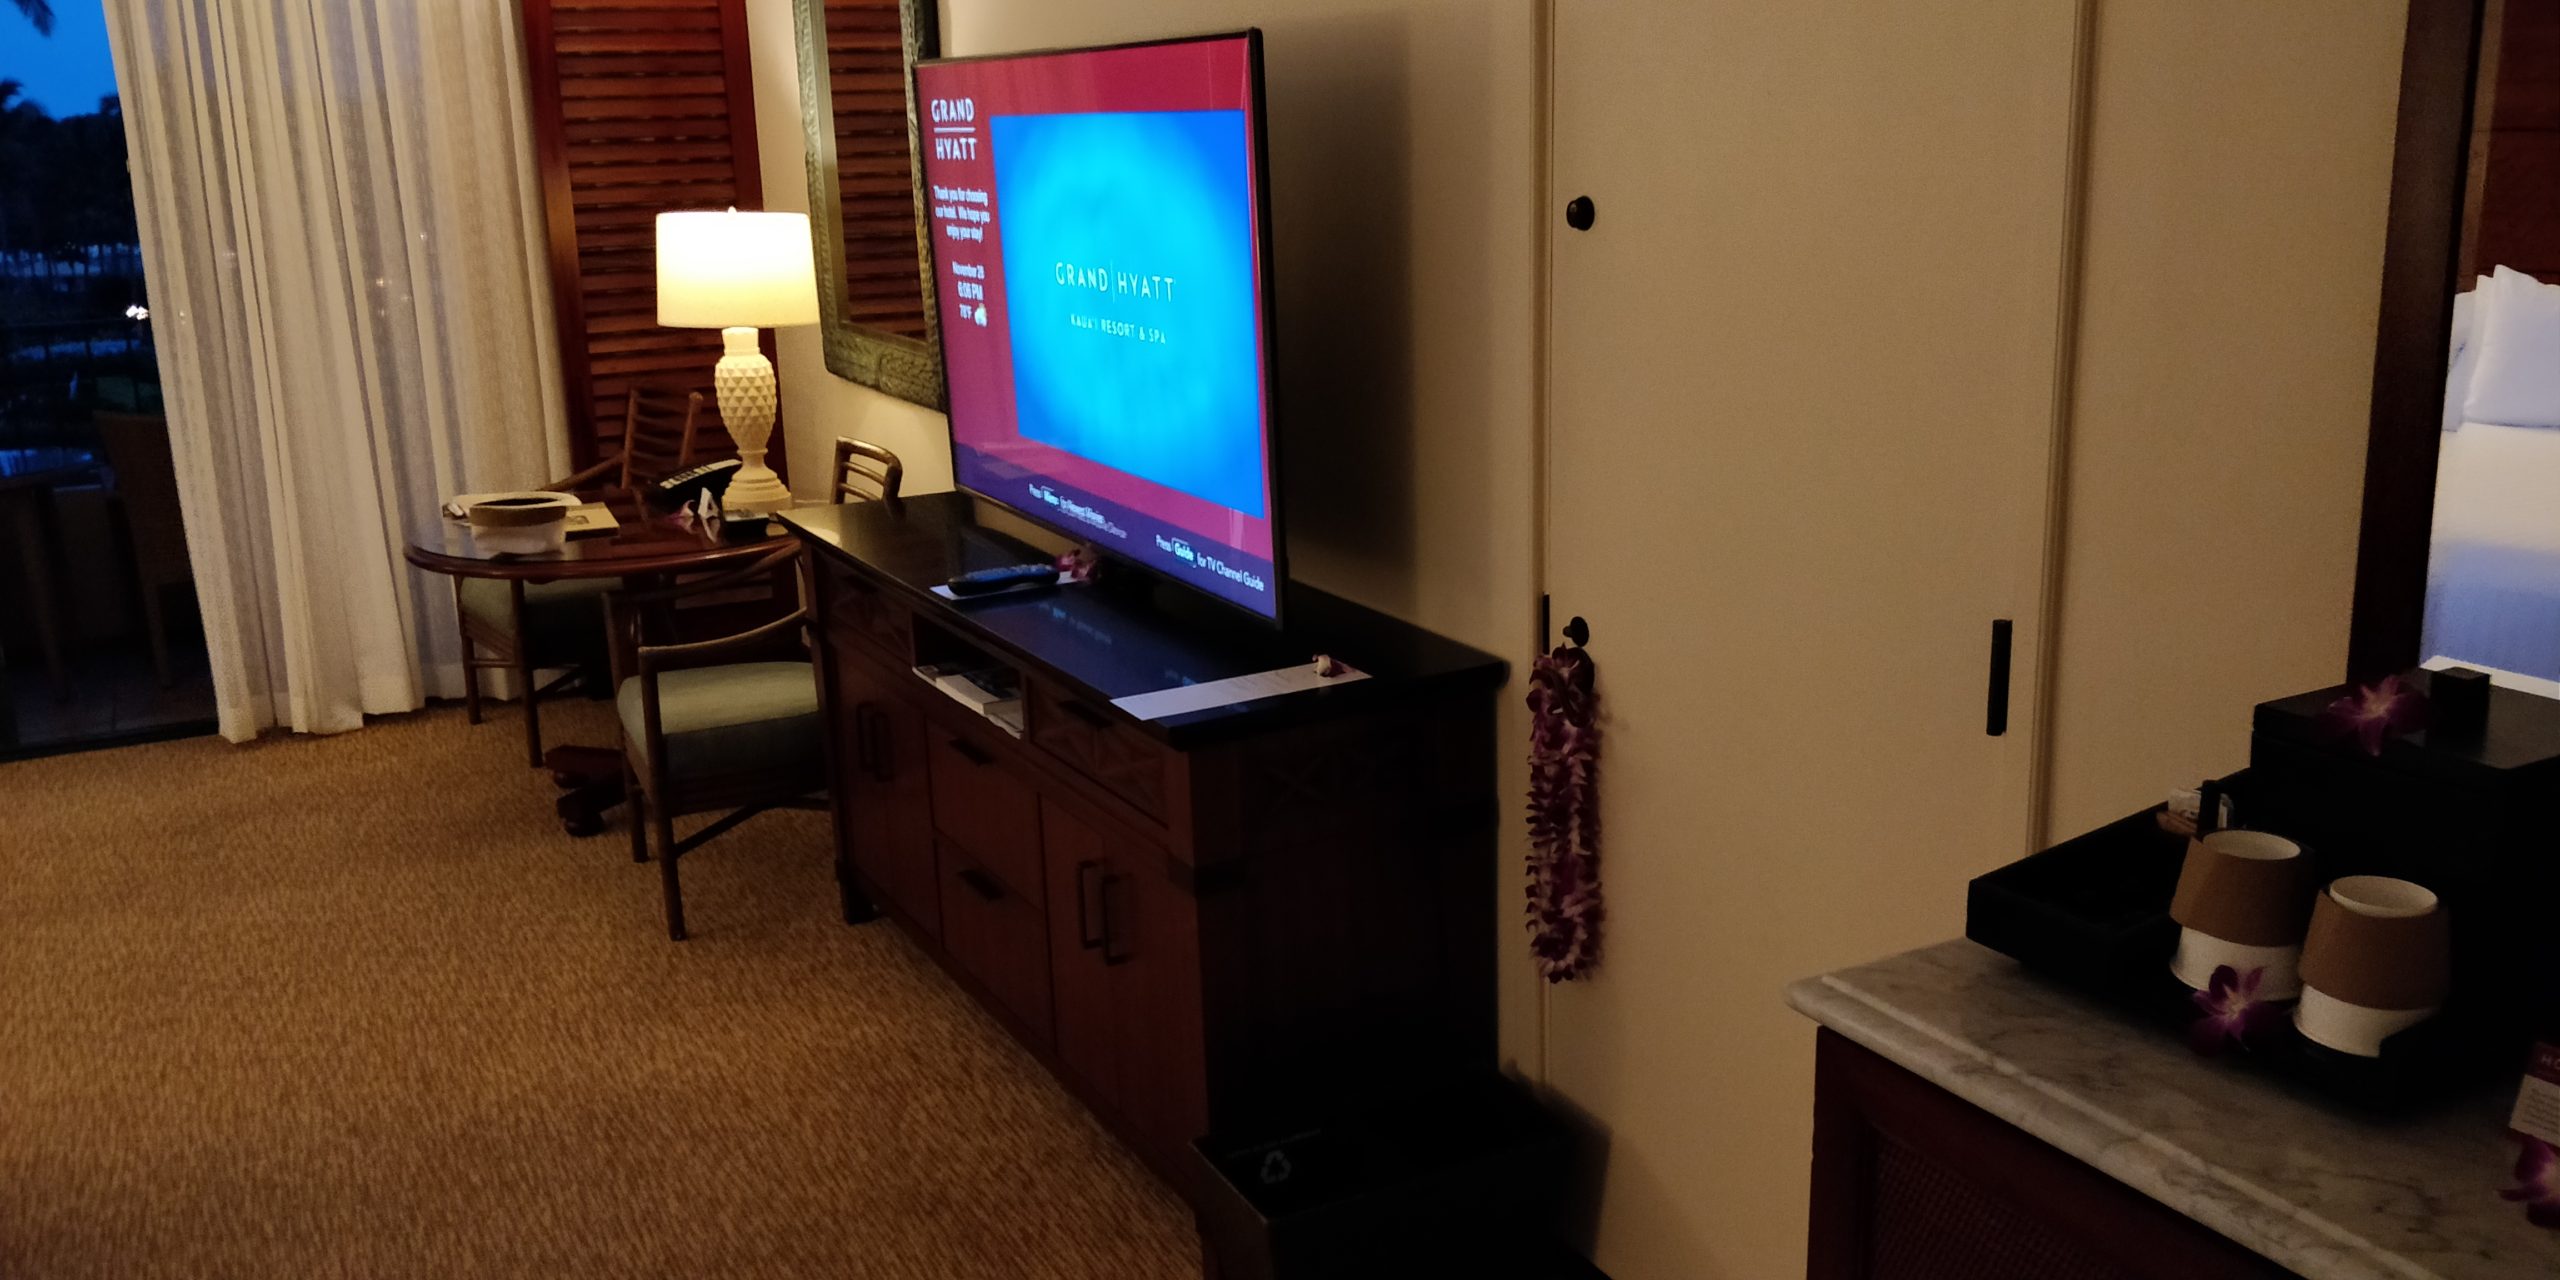 PICTURE OF TV AND TABLE IN ROOM